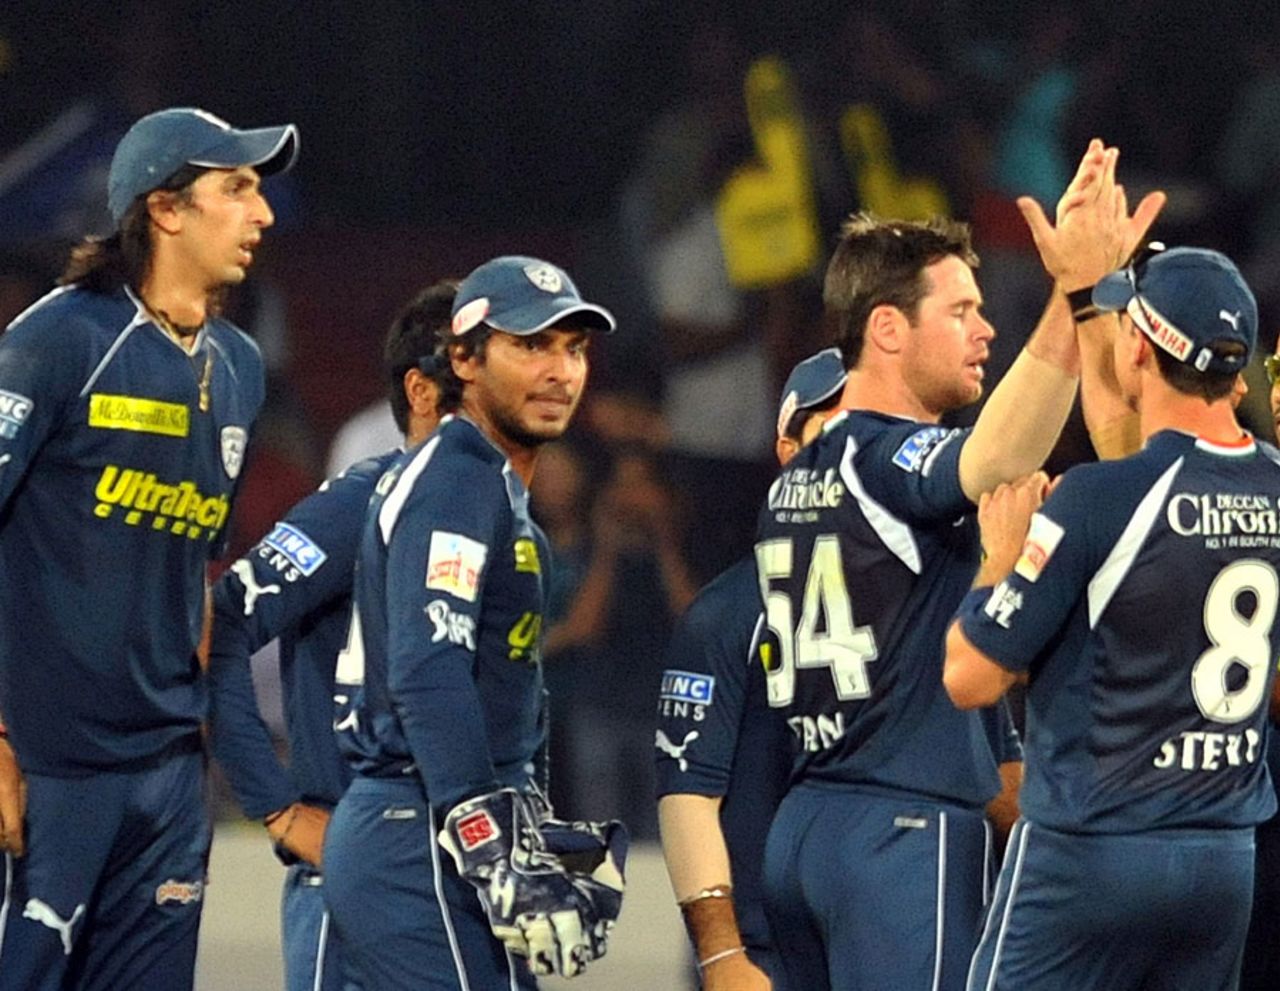 Deccan Chargers get-together after Eoin Morgan's dismissal, Deccan Chargers v Kolkata Knight Riders, IPL 2011, Hyderabad, May 3, 2011